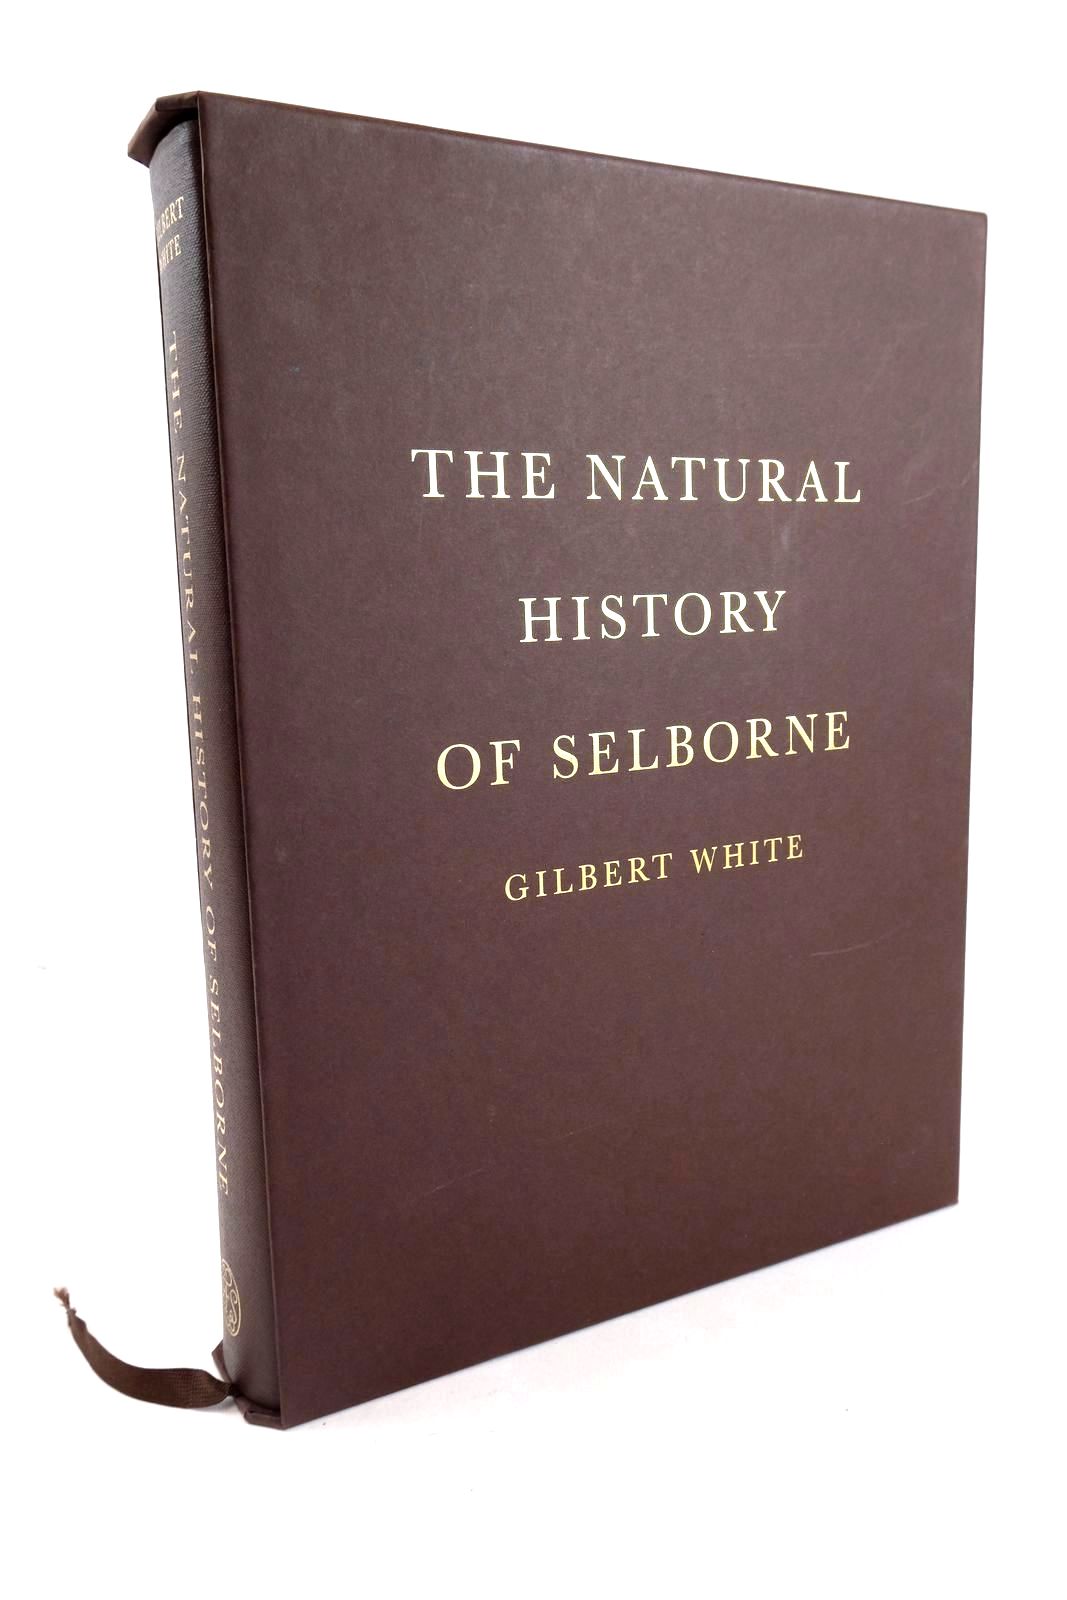 Photo of THE NATURAL HISTORY OF SELBORNE written by White, Gilbert Thomas, Keith published by Folio Society (STOCK CODE: 1326647)  for sale by Stella & Rose's Books